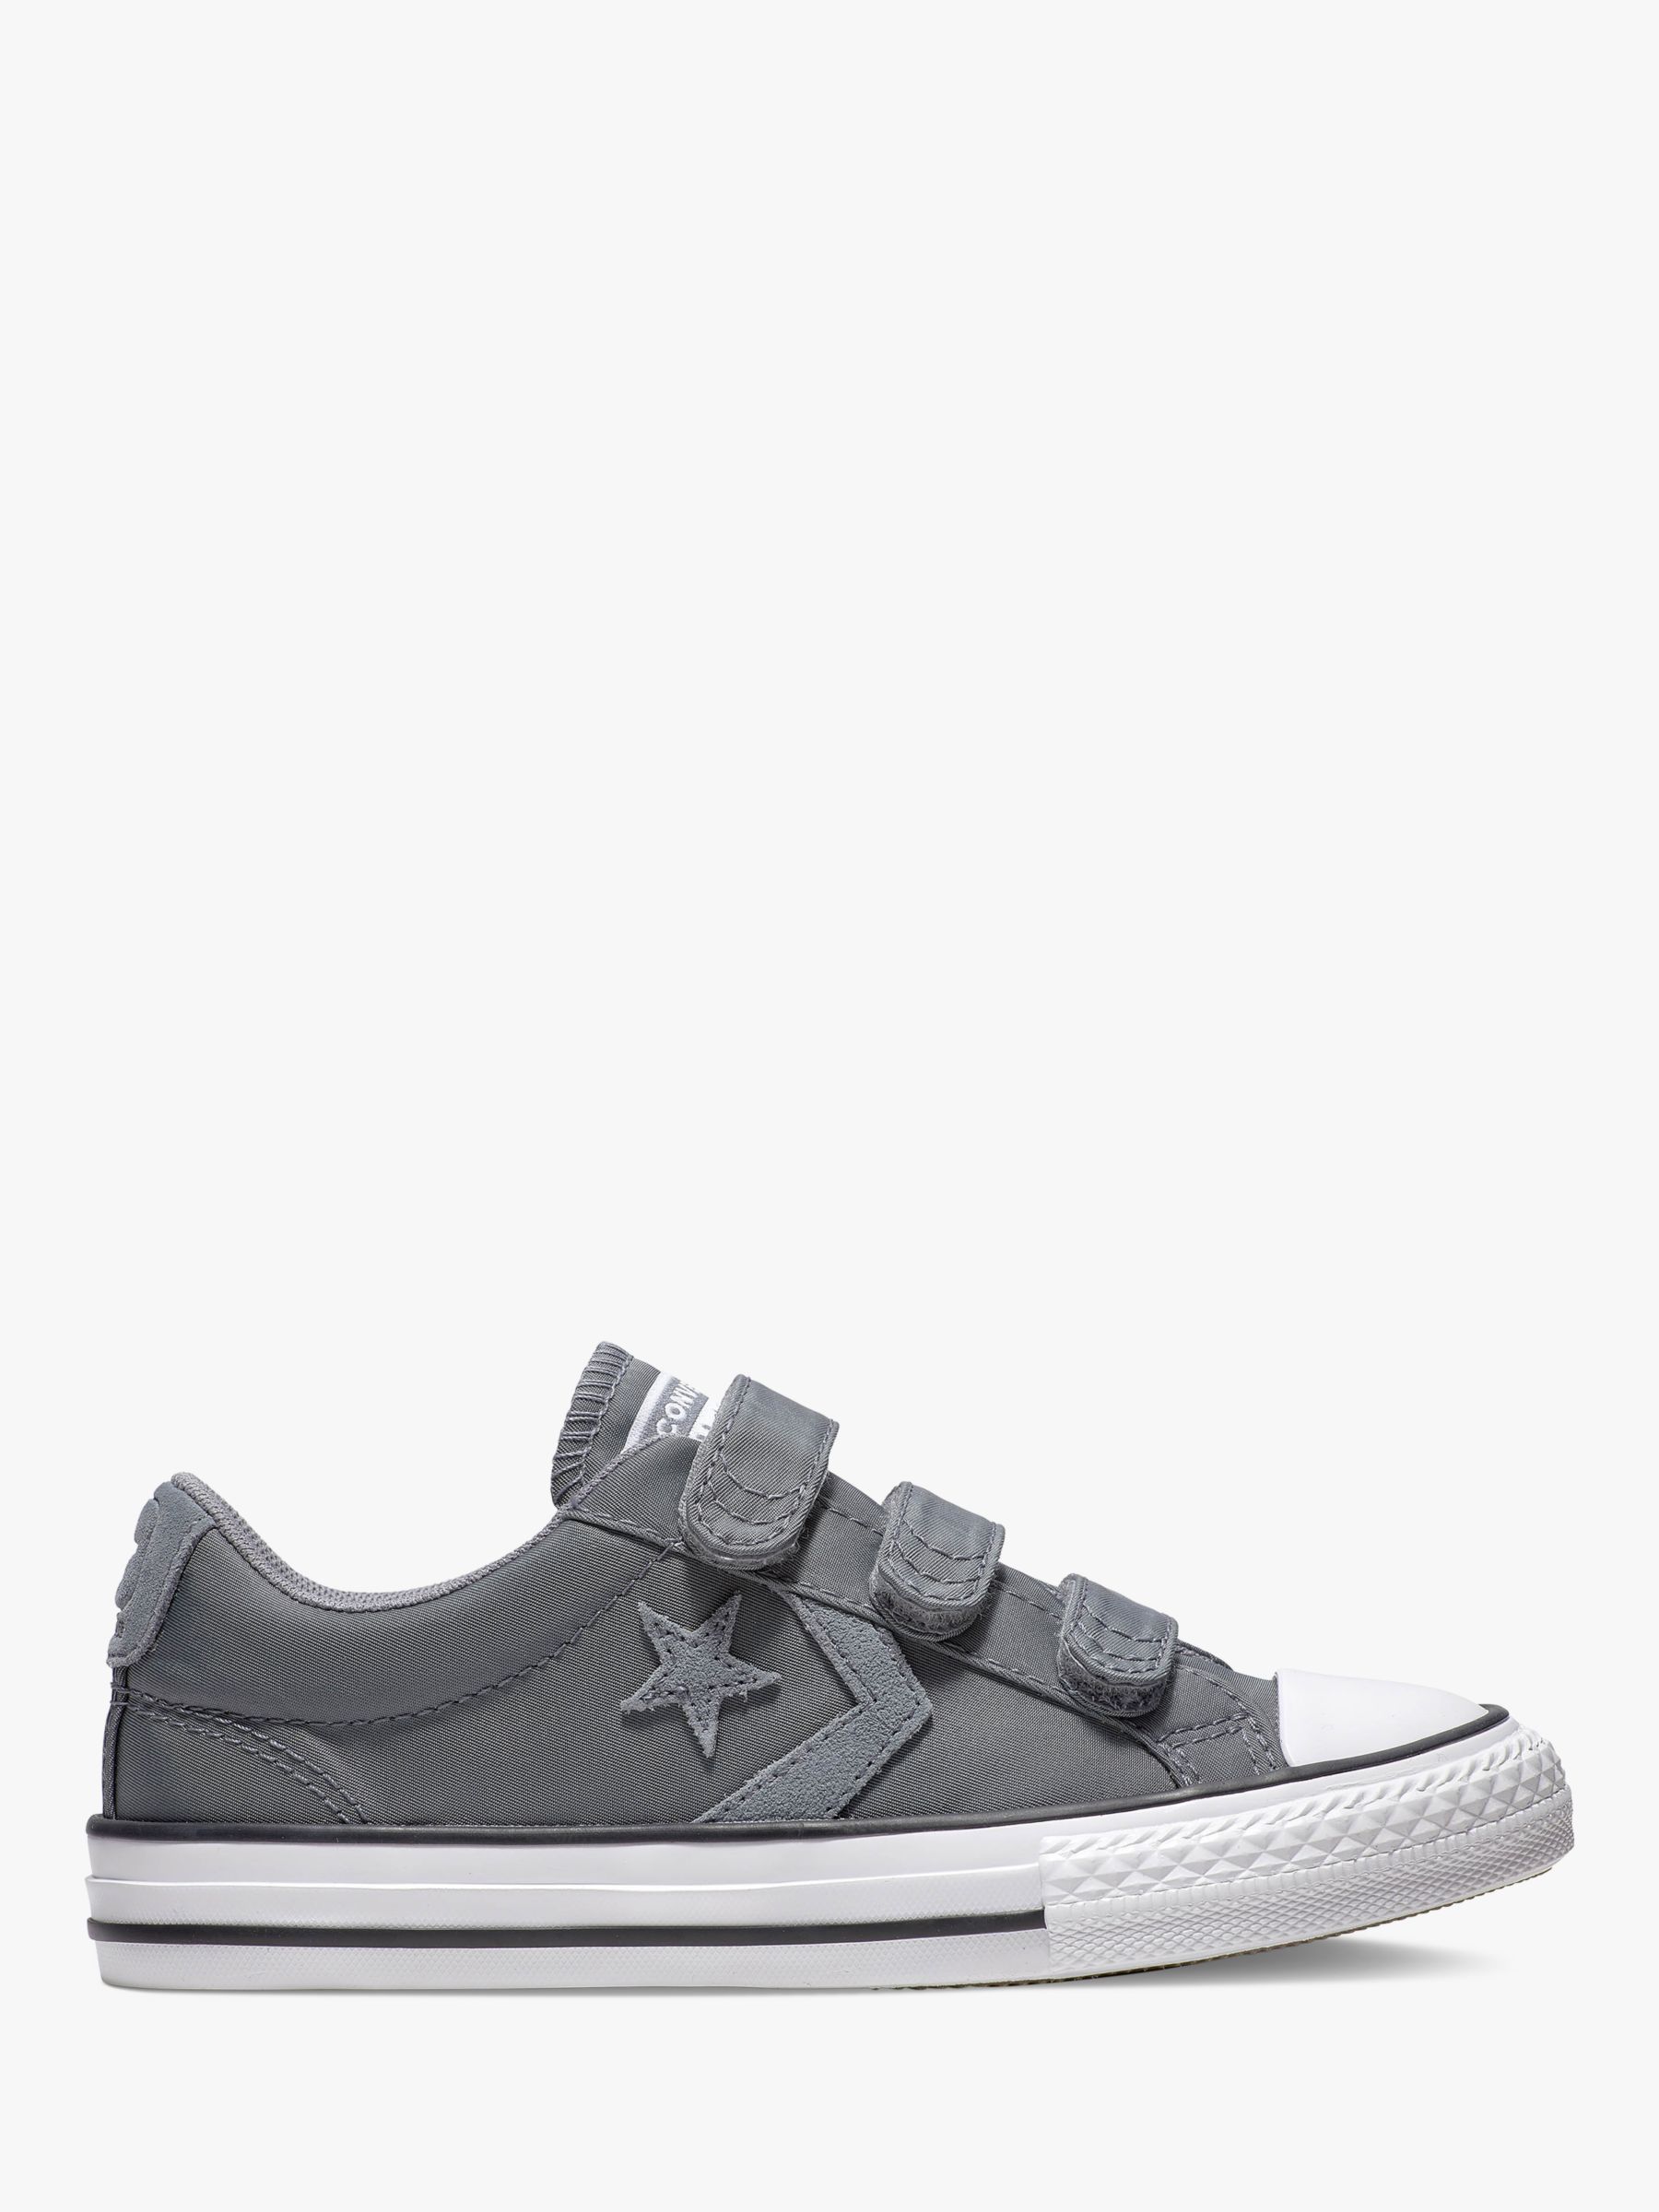 Converse Children's Star Player 3V Trainers, Grey